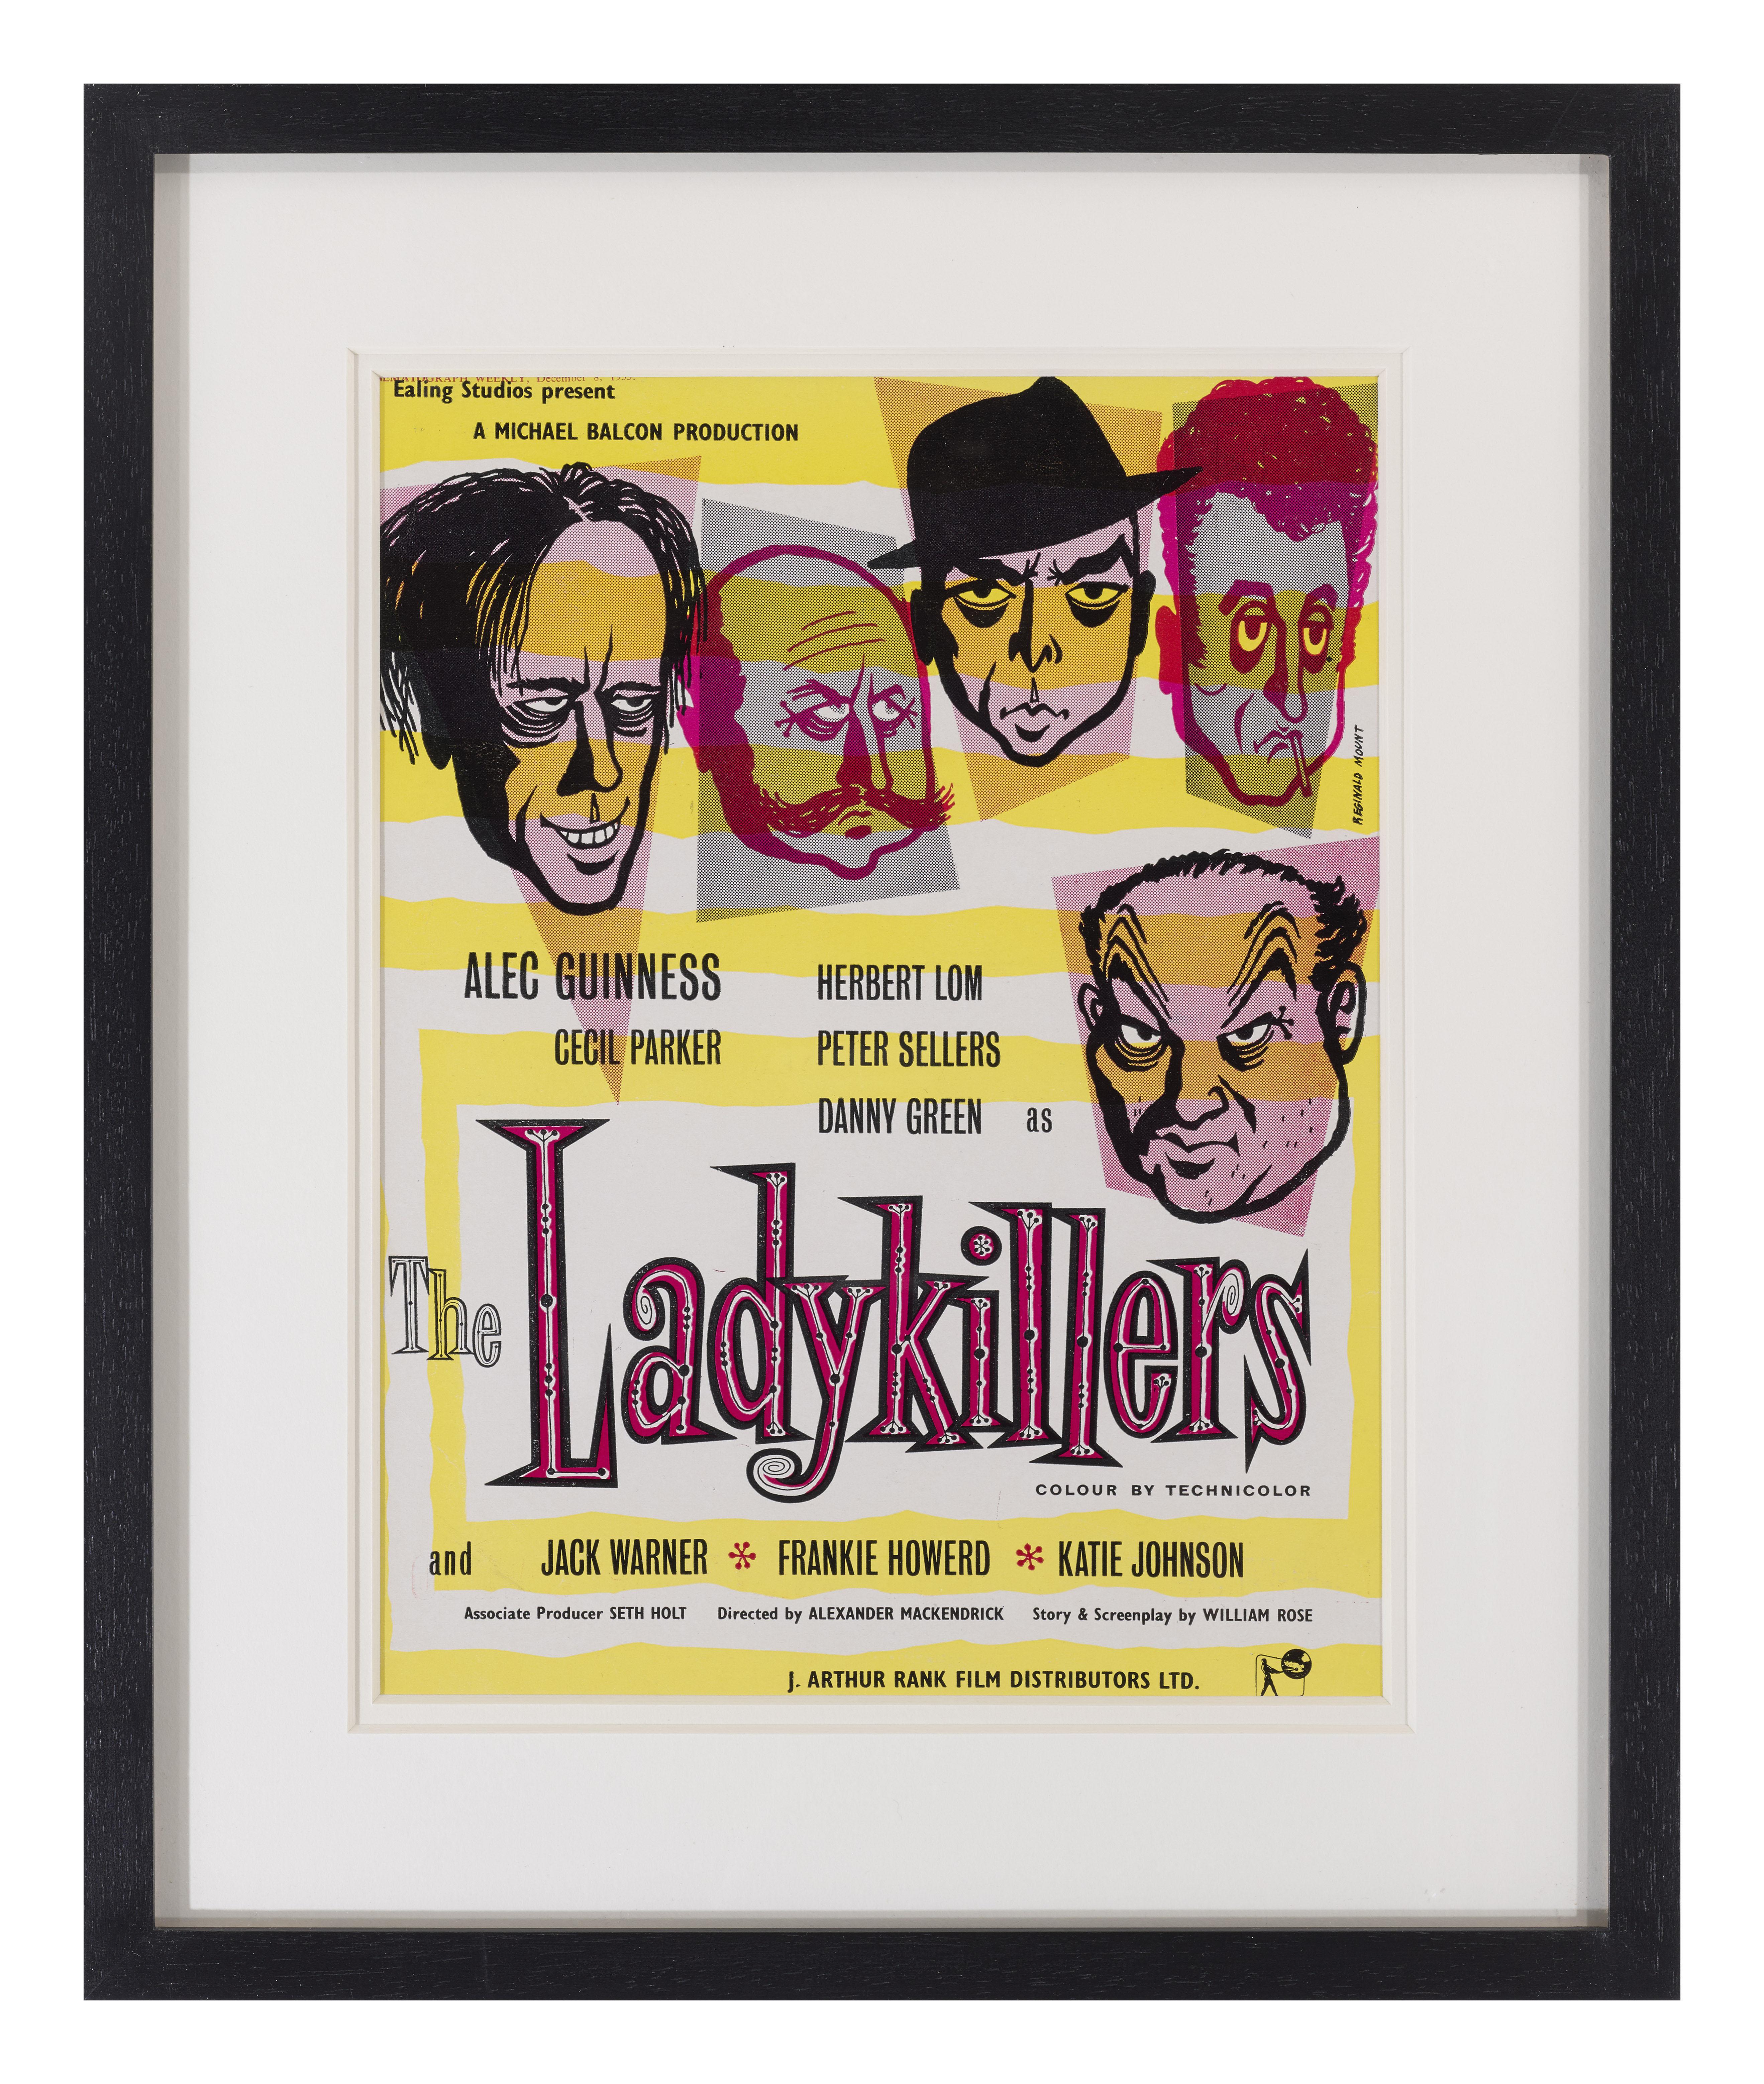 Original 1955 trade advertisement from Kinematograph weekly December 8th 1955. This was part of the advertising Campaign in the UK for the Classic Ealing comedy The Ladykillers starring Alec Guinness, Peter Sellers.
This piece is conservation